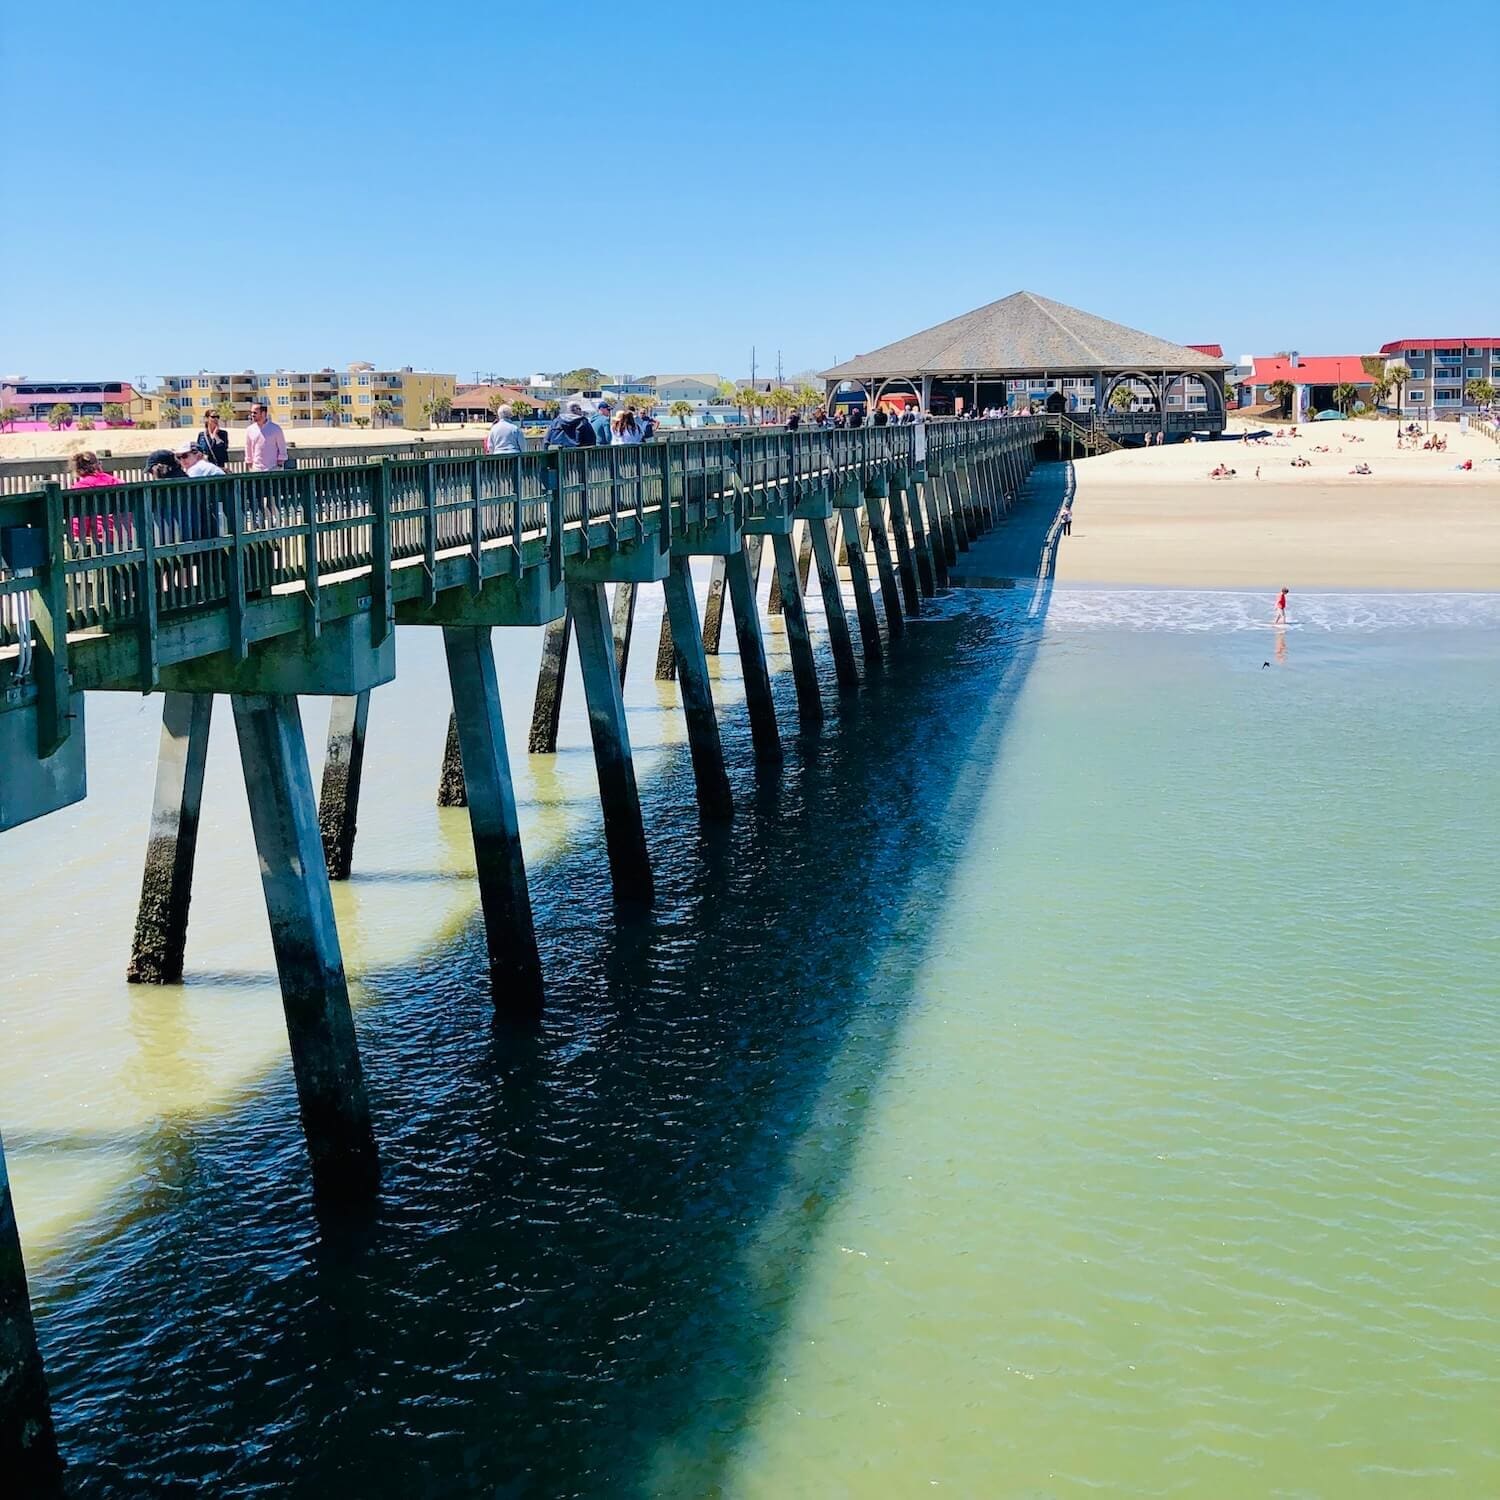 Tybee island pier and pavilion